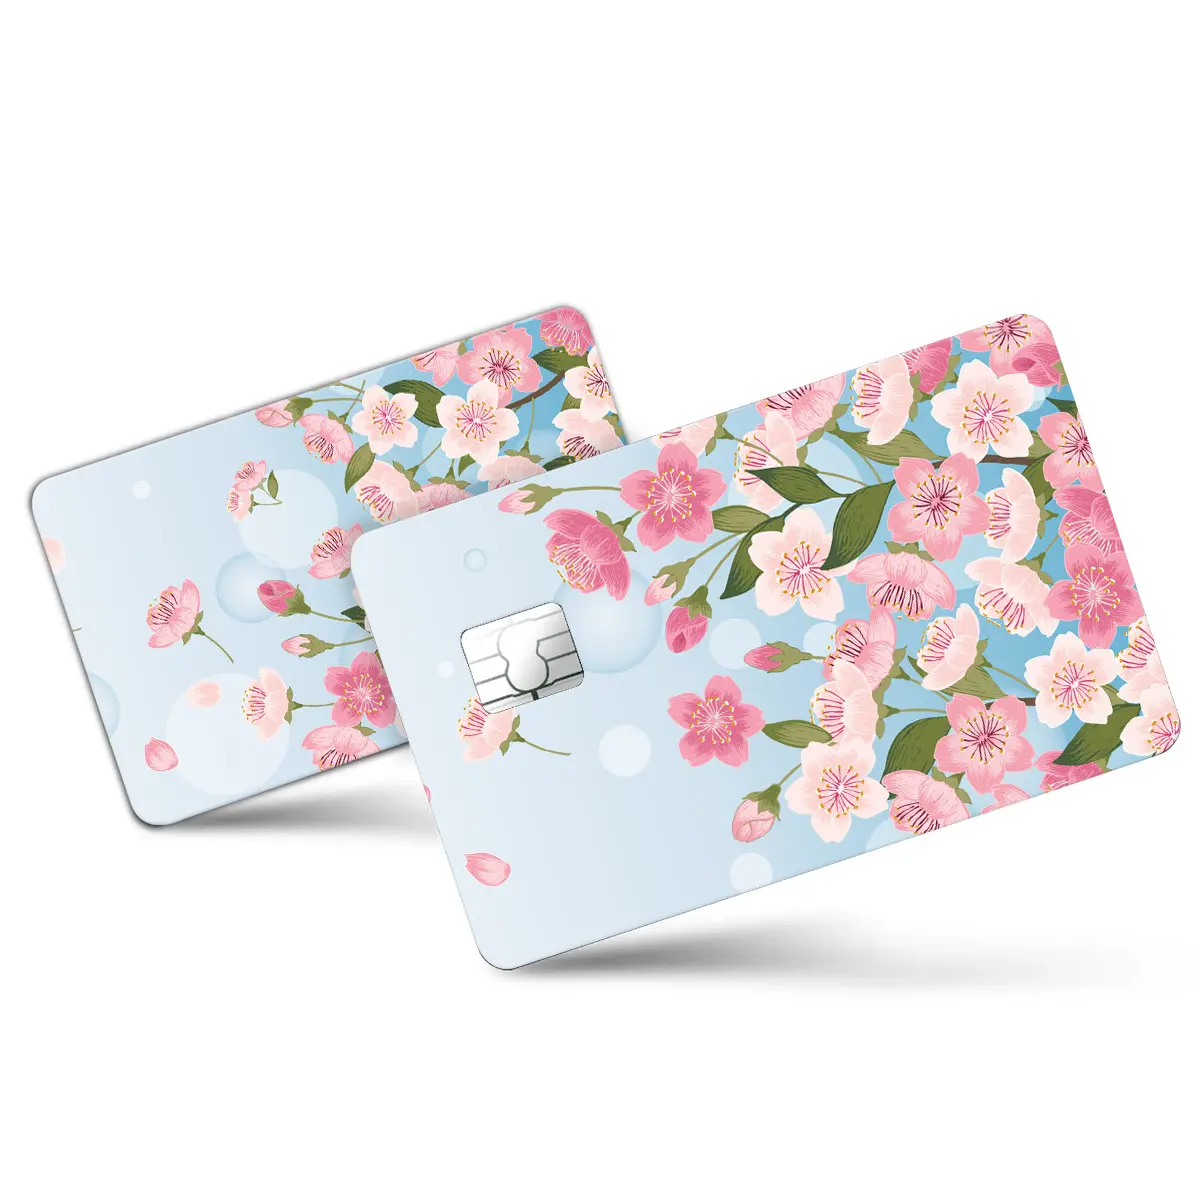 Design In Stock Debit Card Covers Anime Skin Stickers for Bank Credit Card, Accept Custom LOGO